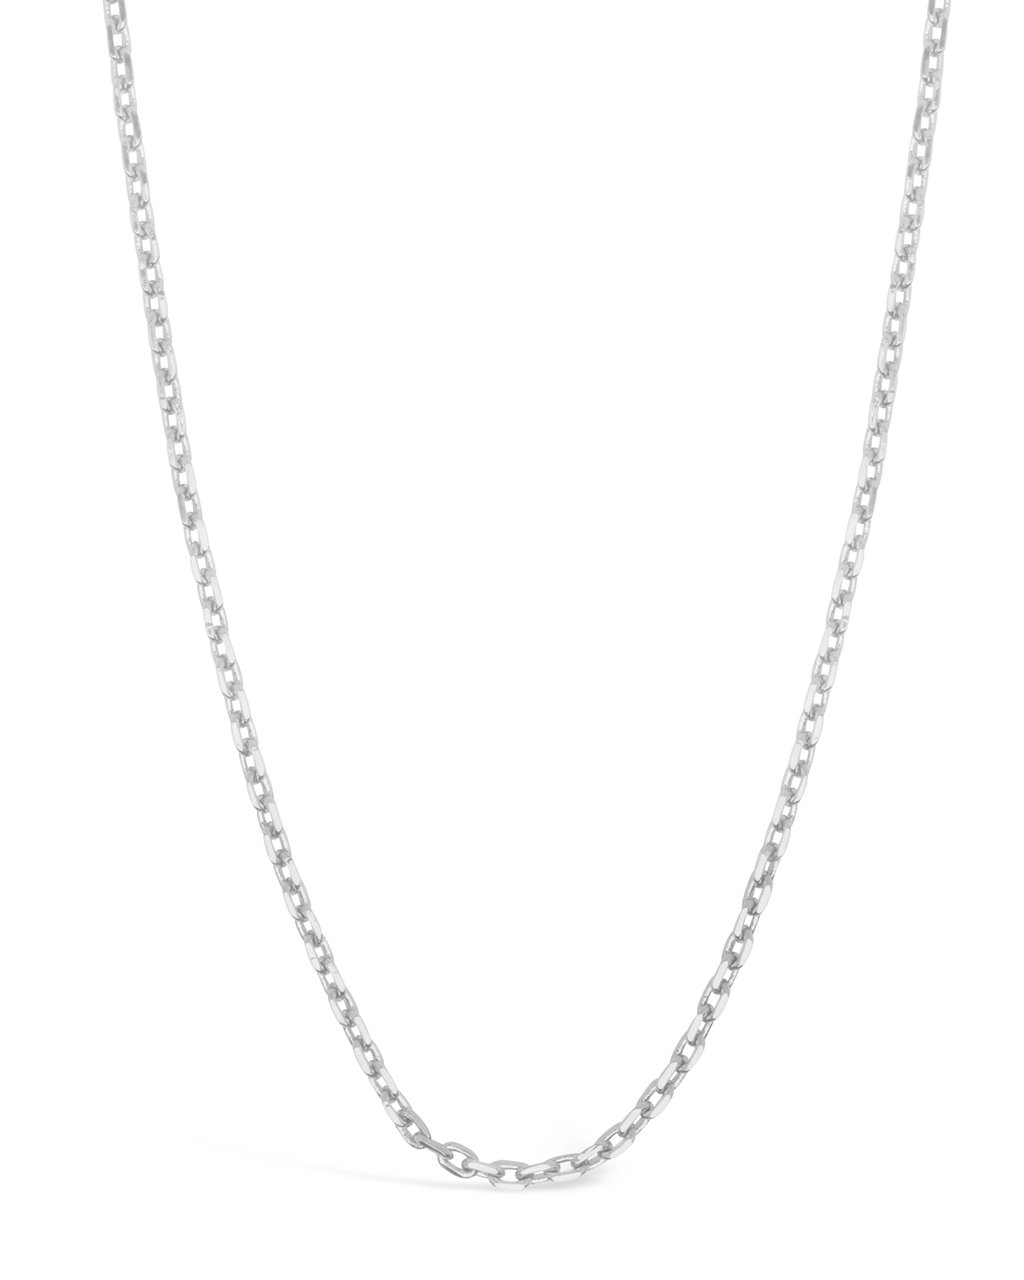 Dainty Link Face Mask Chain Face Mask Chain Sterling Forever Silver 